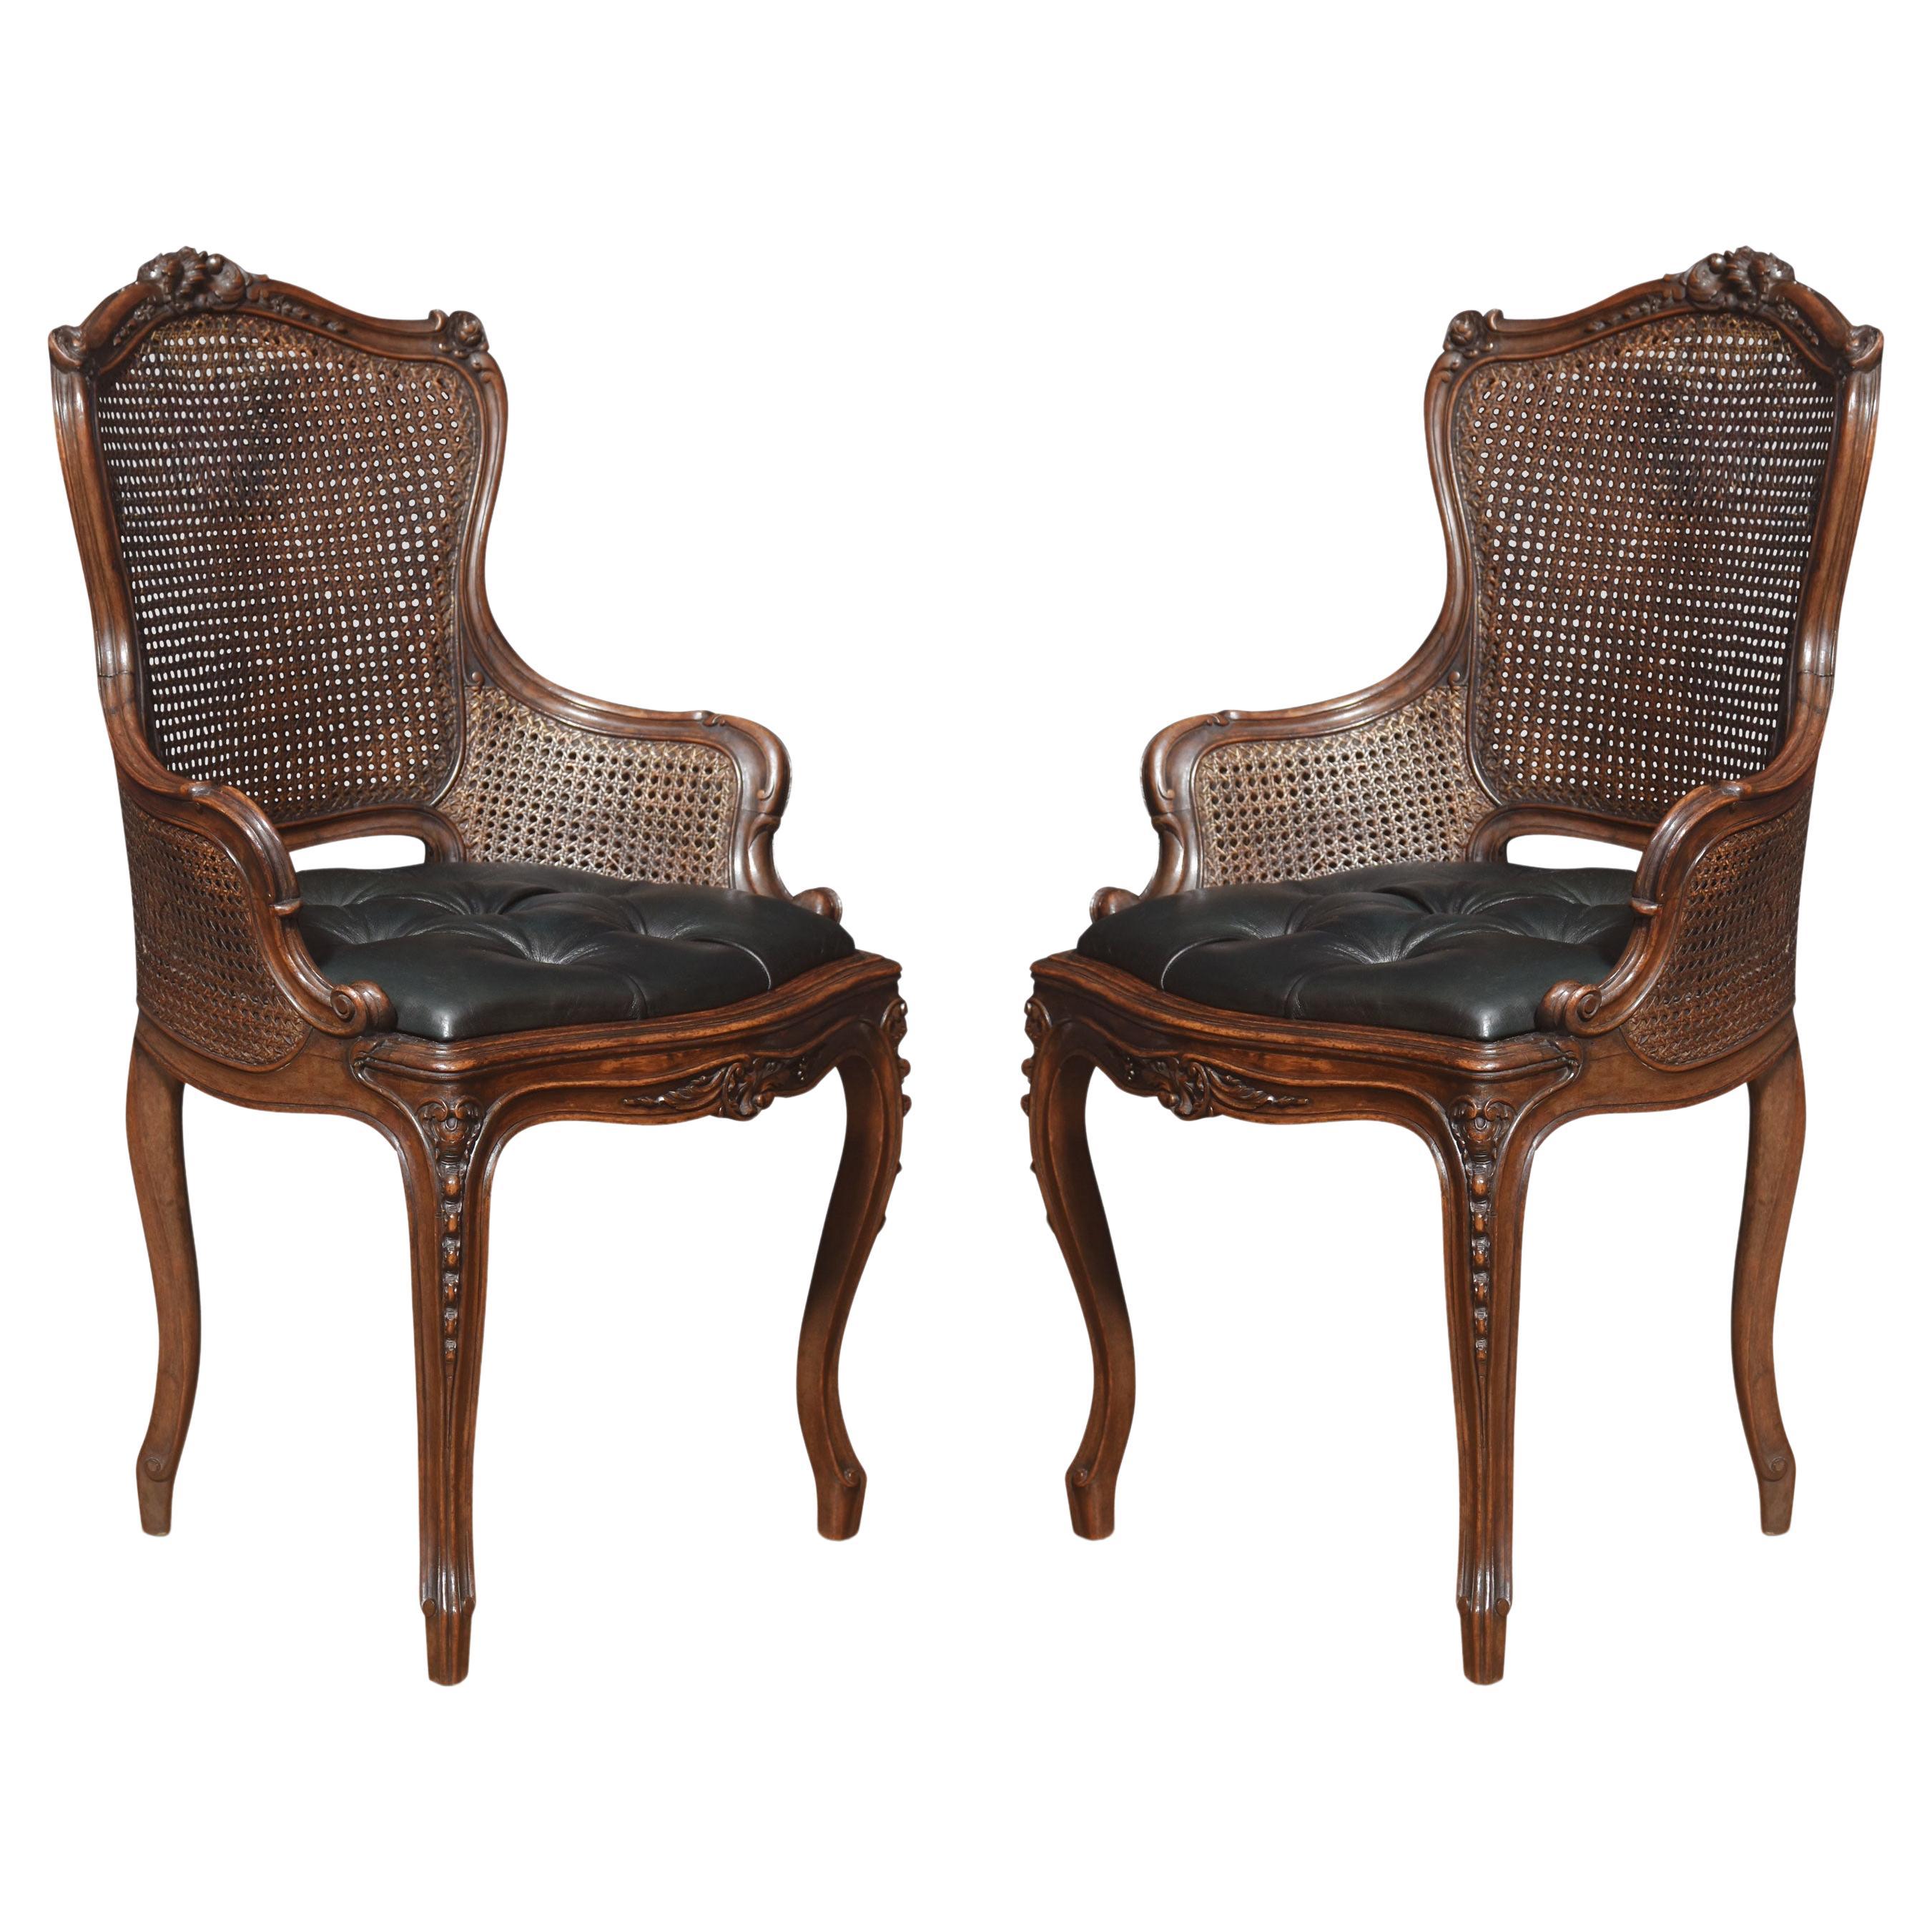 Pair of Louis XV style side chairs